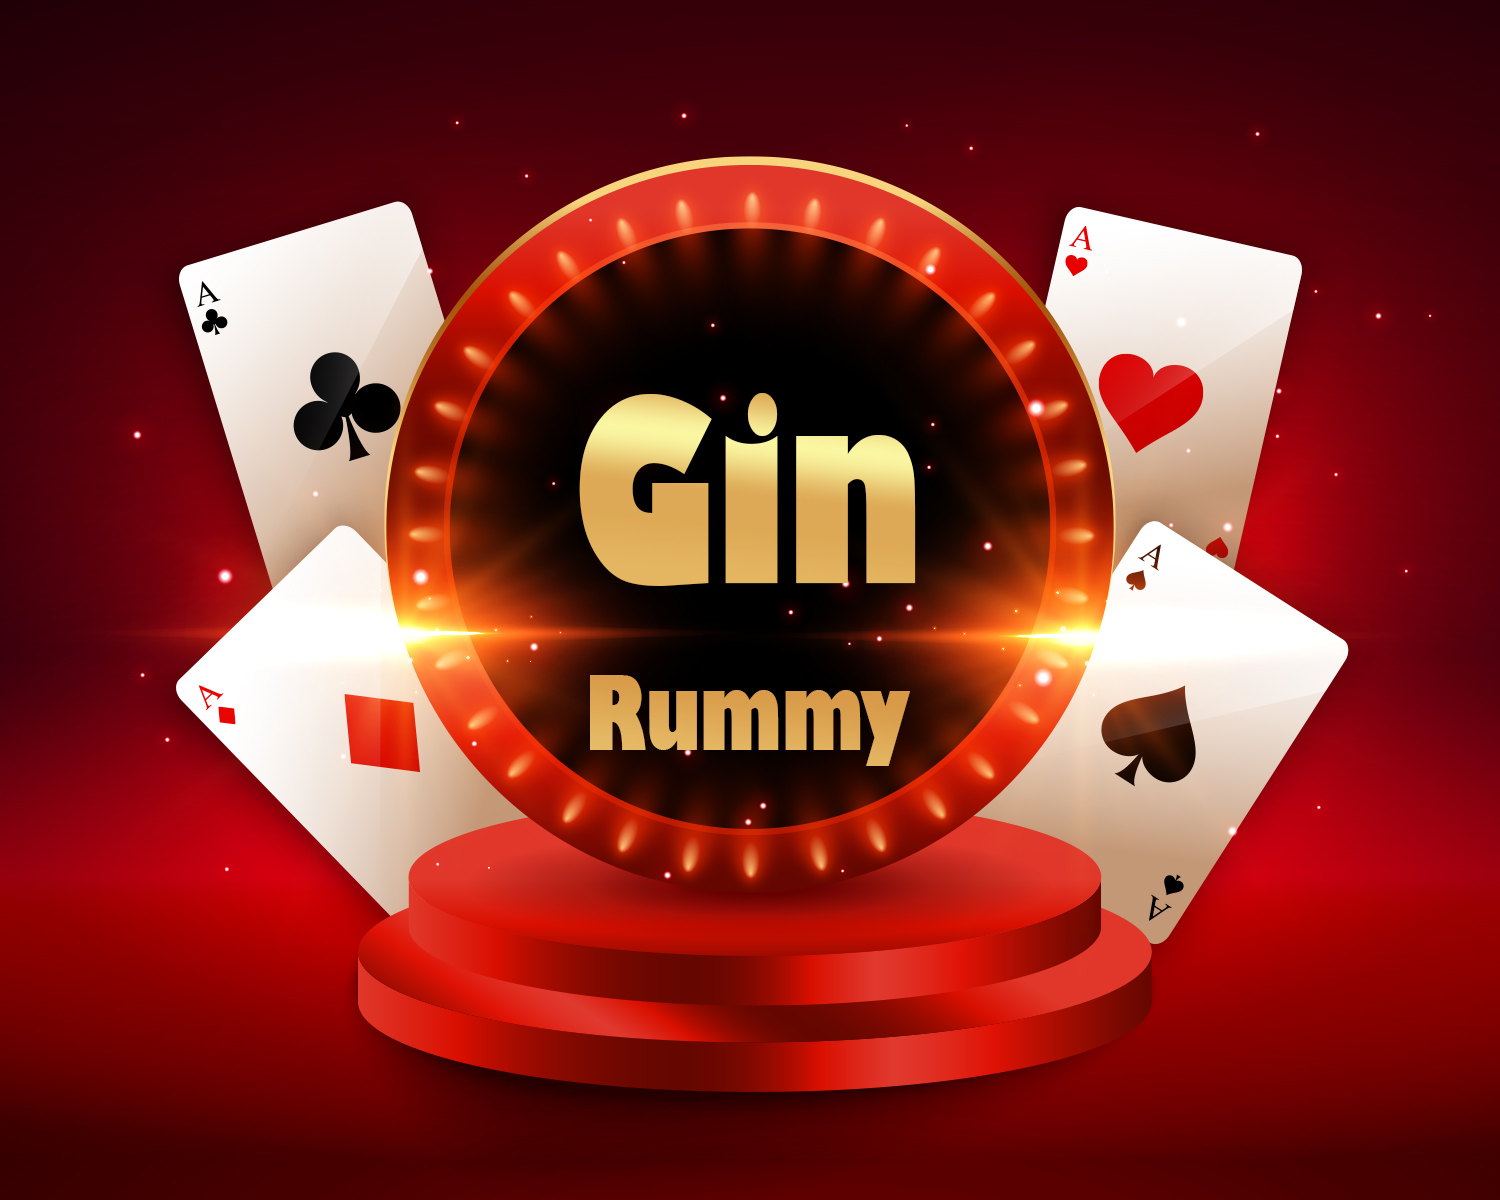 gin rummy knock rules